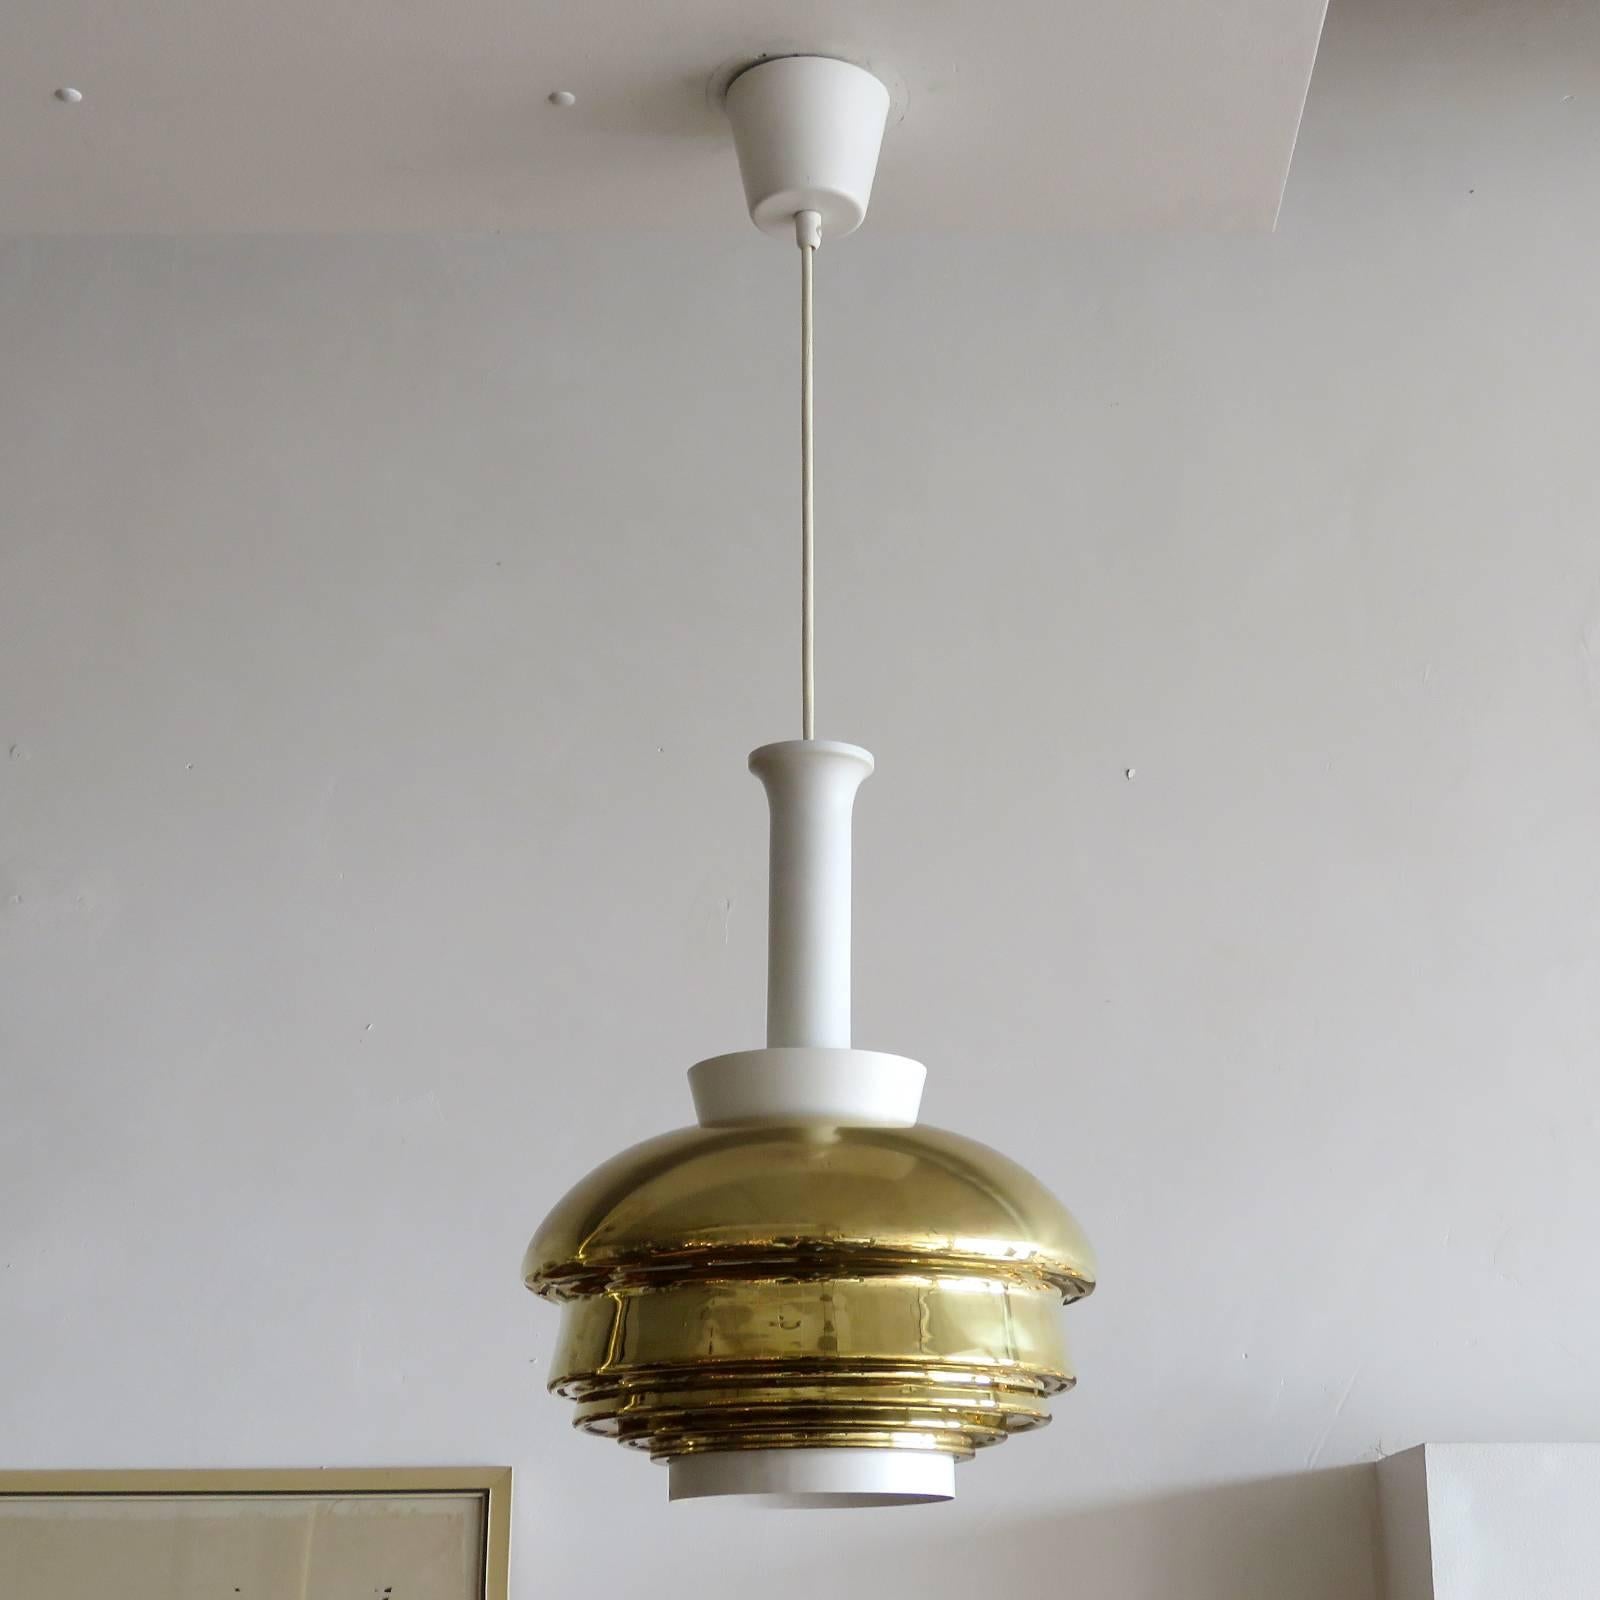 Wonderful pendant light, model A335 by Alvar Aalto, in brass and white enameled metal, with original metal canopy and white bottom rim, early example by original manufacture Valaistustyö, Finland, 1952, stamped with manufacture's mark.